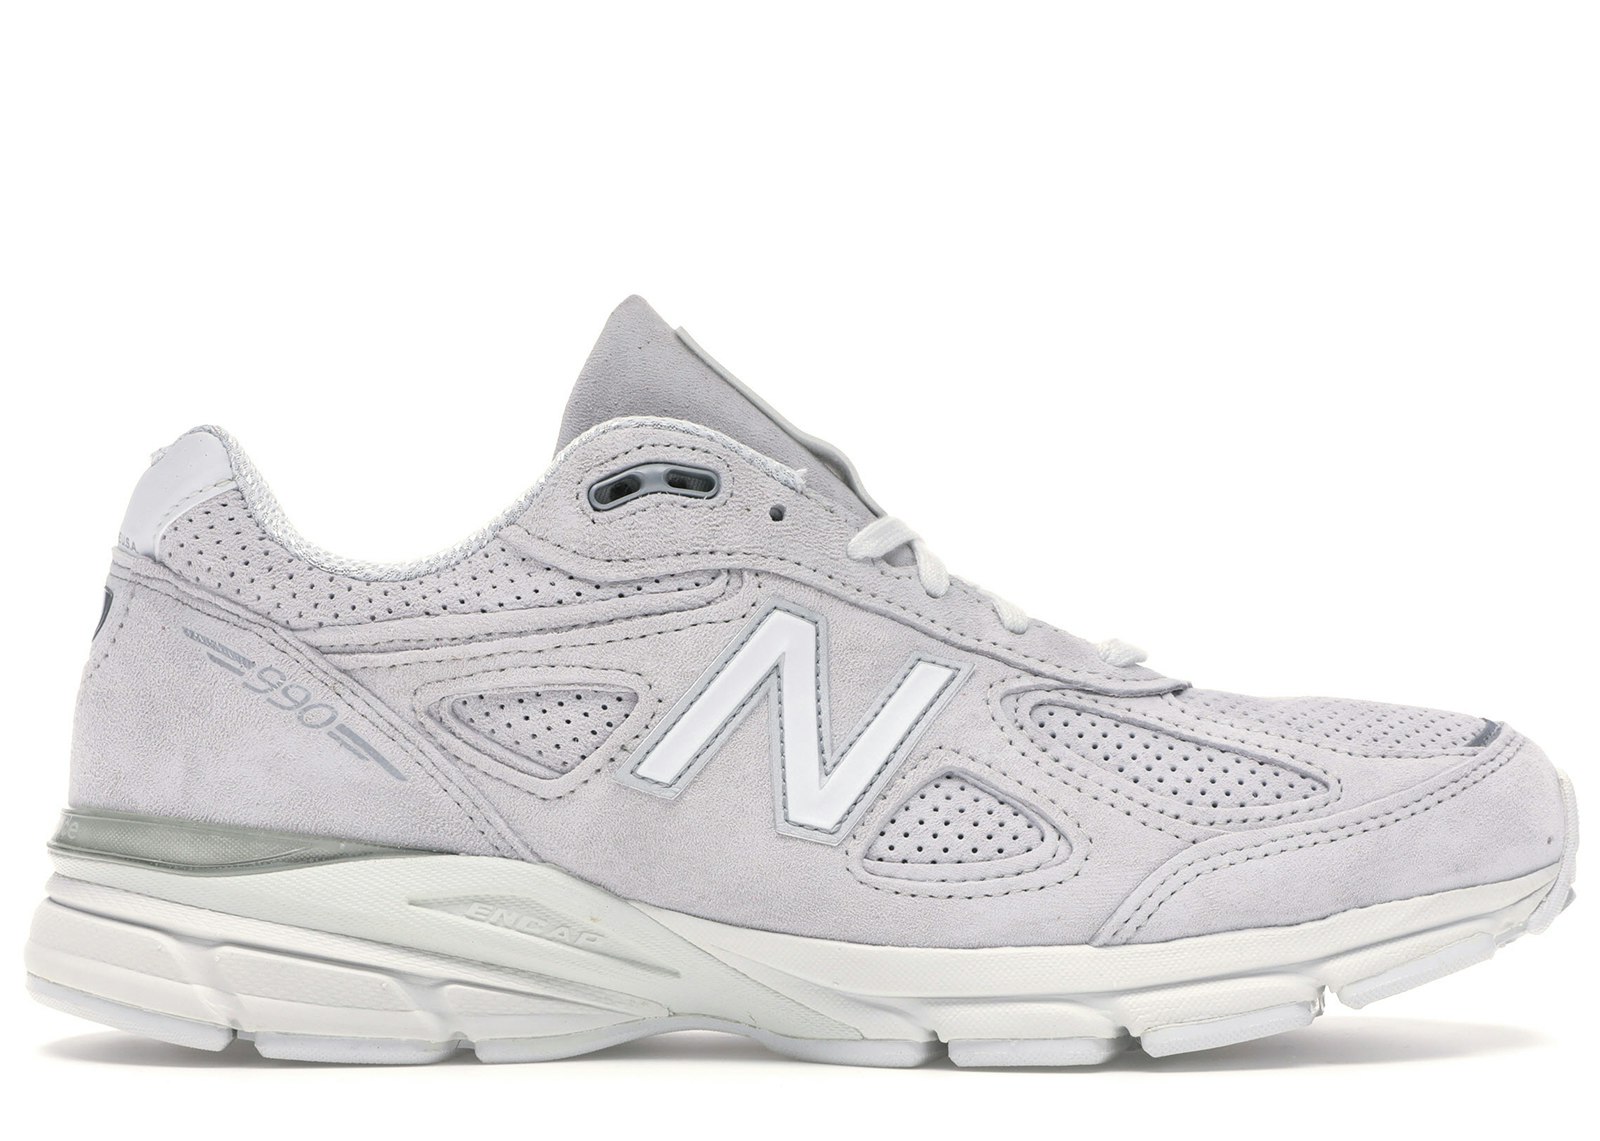 Buy New Balance 990v4 Shoes  New Sneakers - StockX